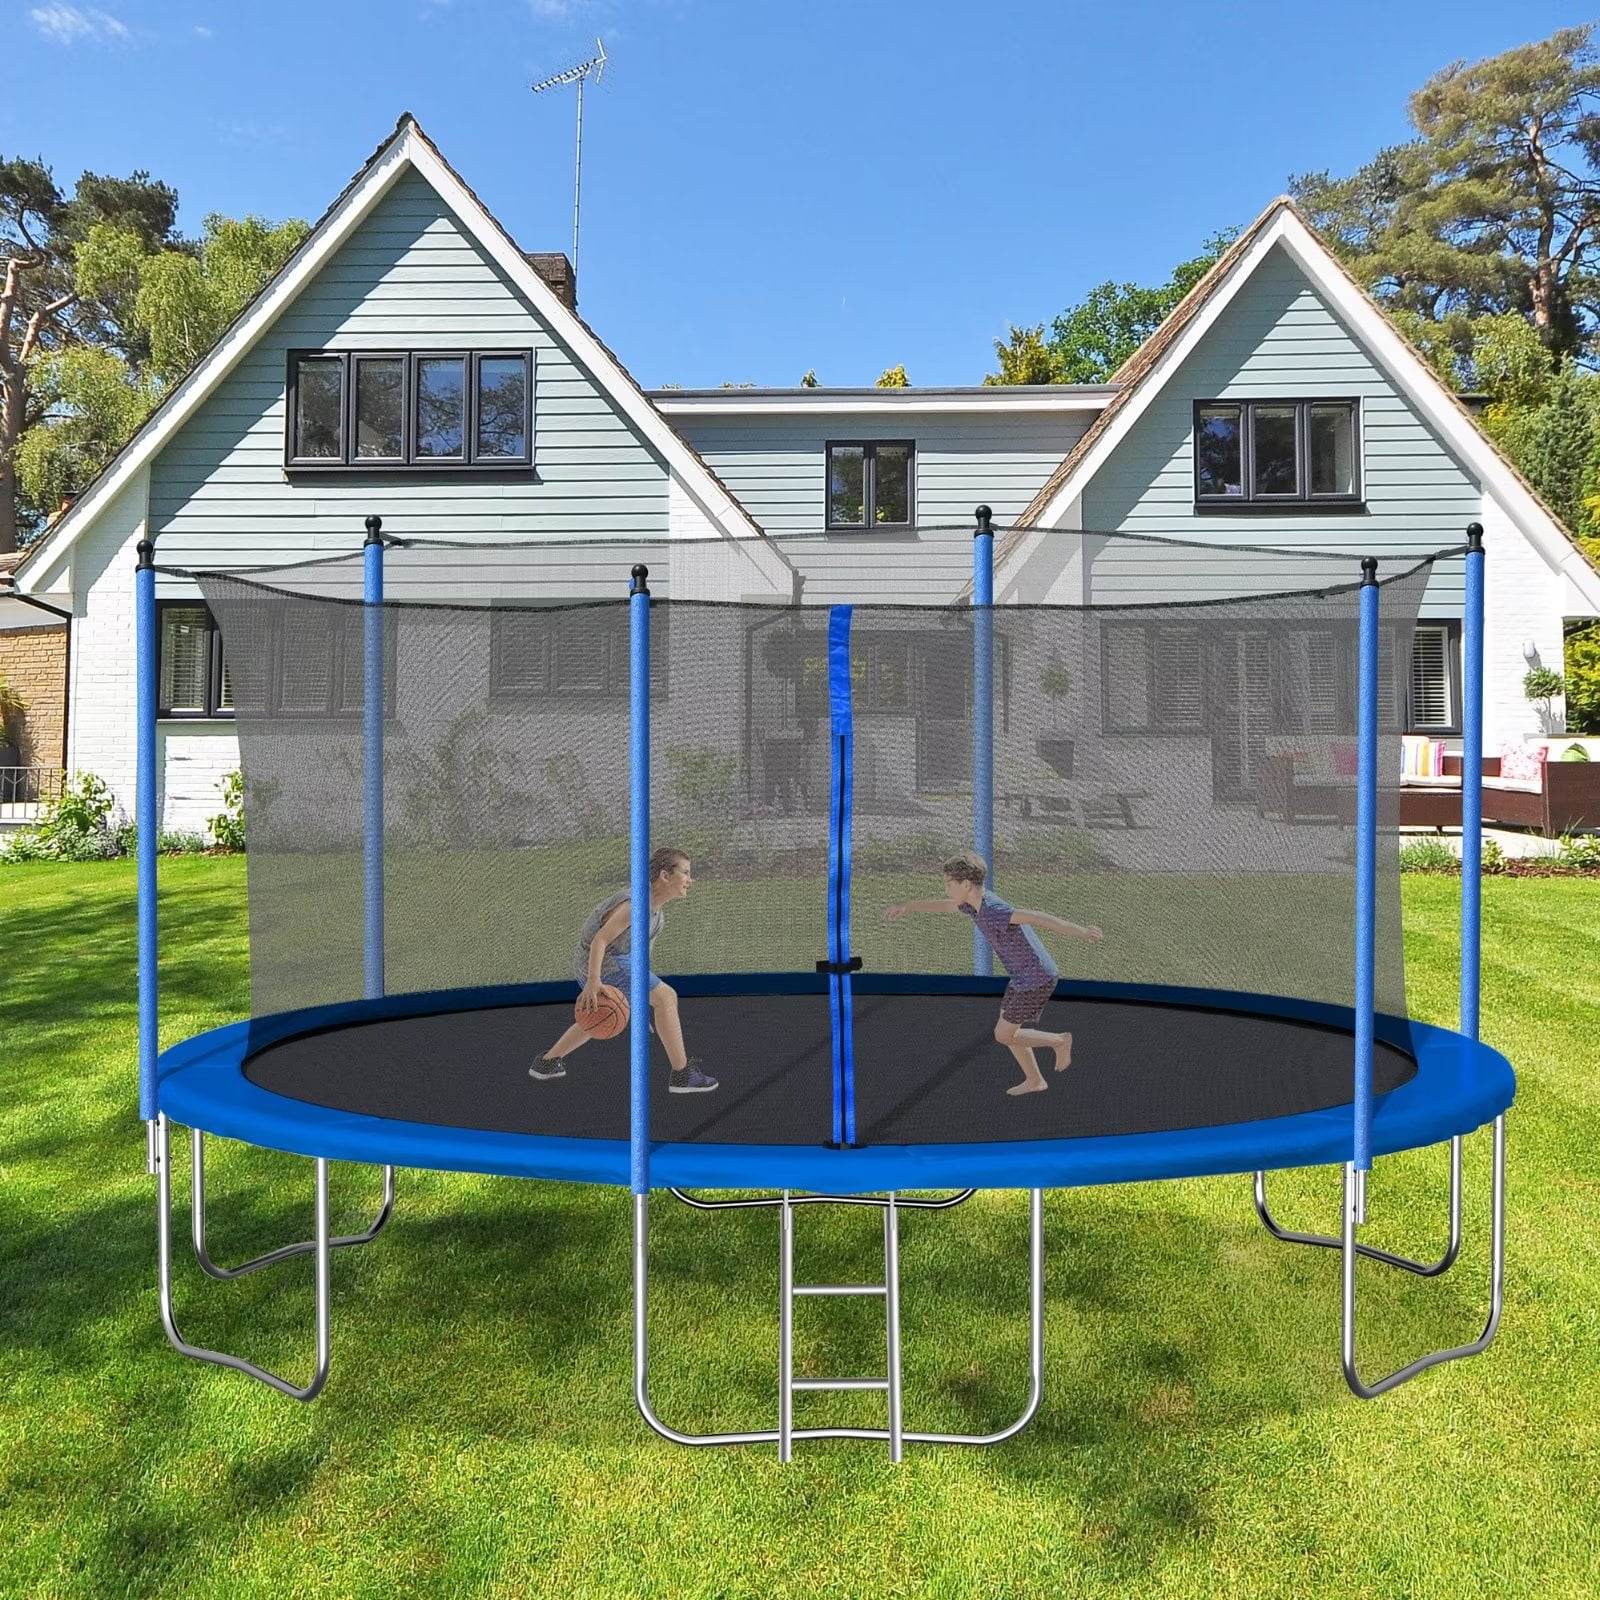 14 Ft Trampoline, Outdoor Exercise Bouncer Rebounders with 360-Degree Safety Net and Steel Tube Legs, Bouncing Trampoline with Ladder and Galvanized Springs Backyard Blue - Walmart.com